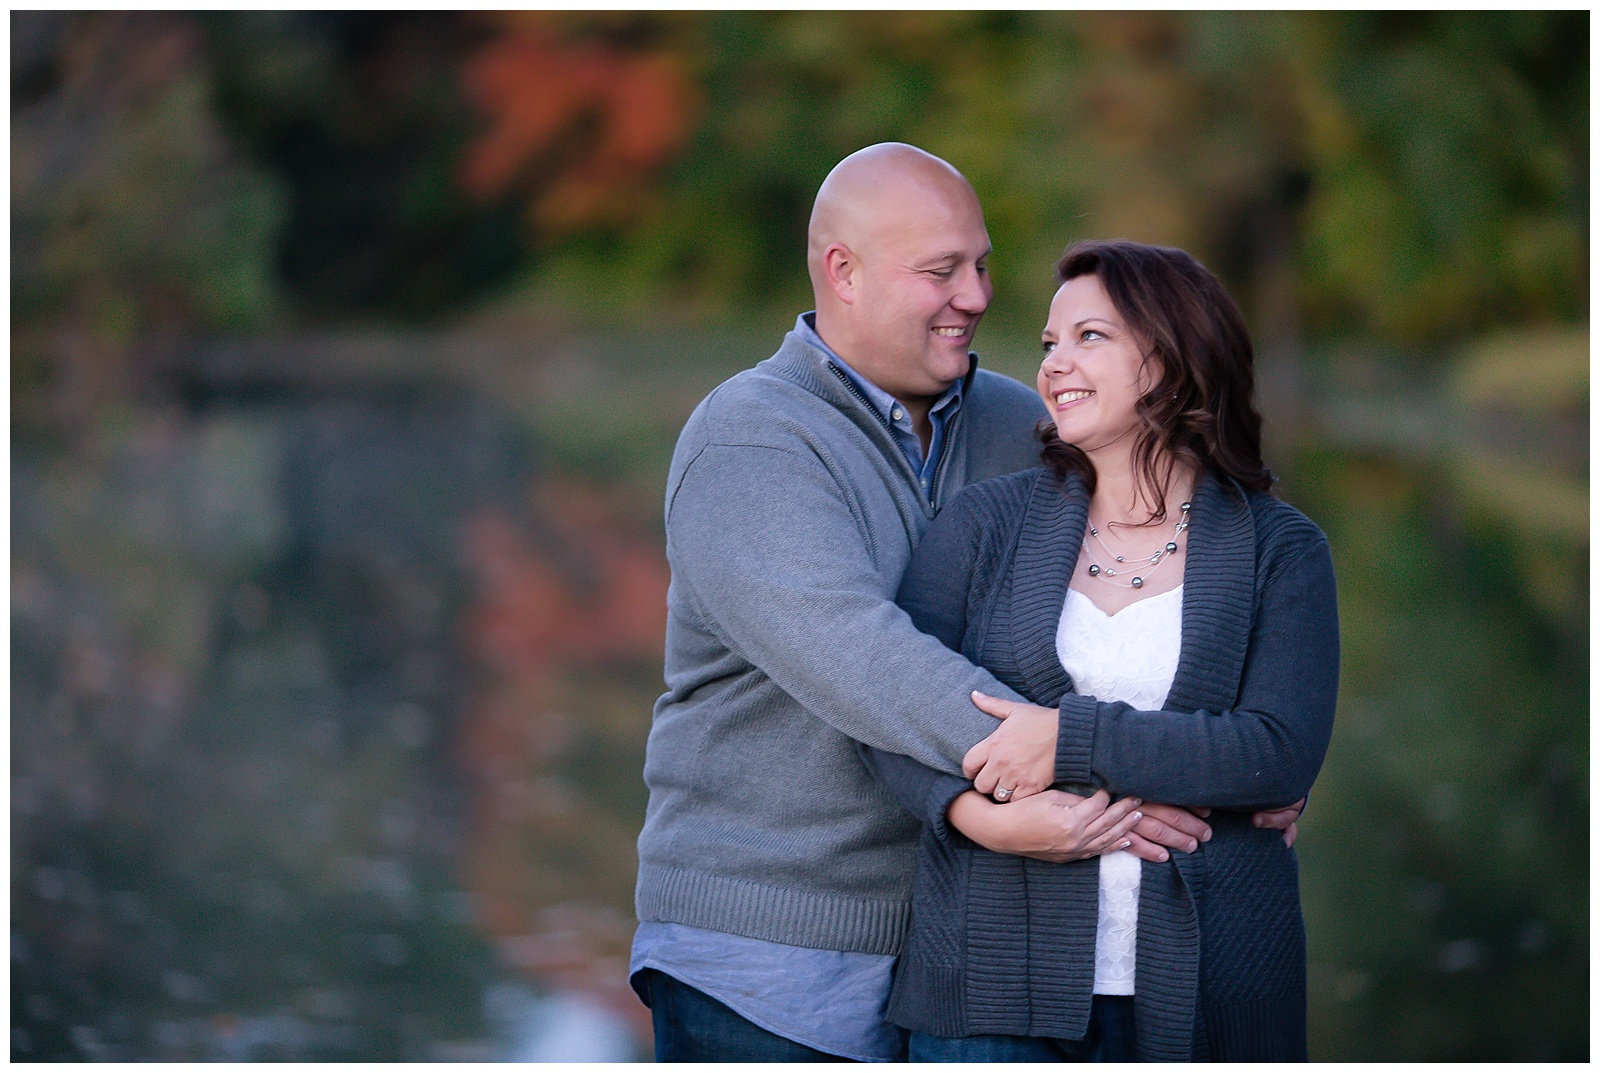 An engagement session at Penguin Park in Kansas City.